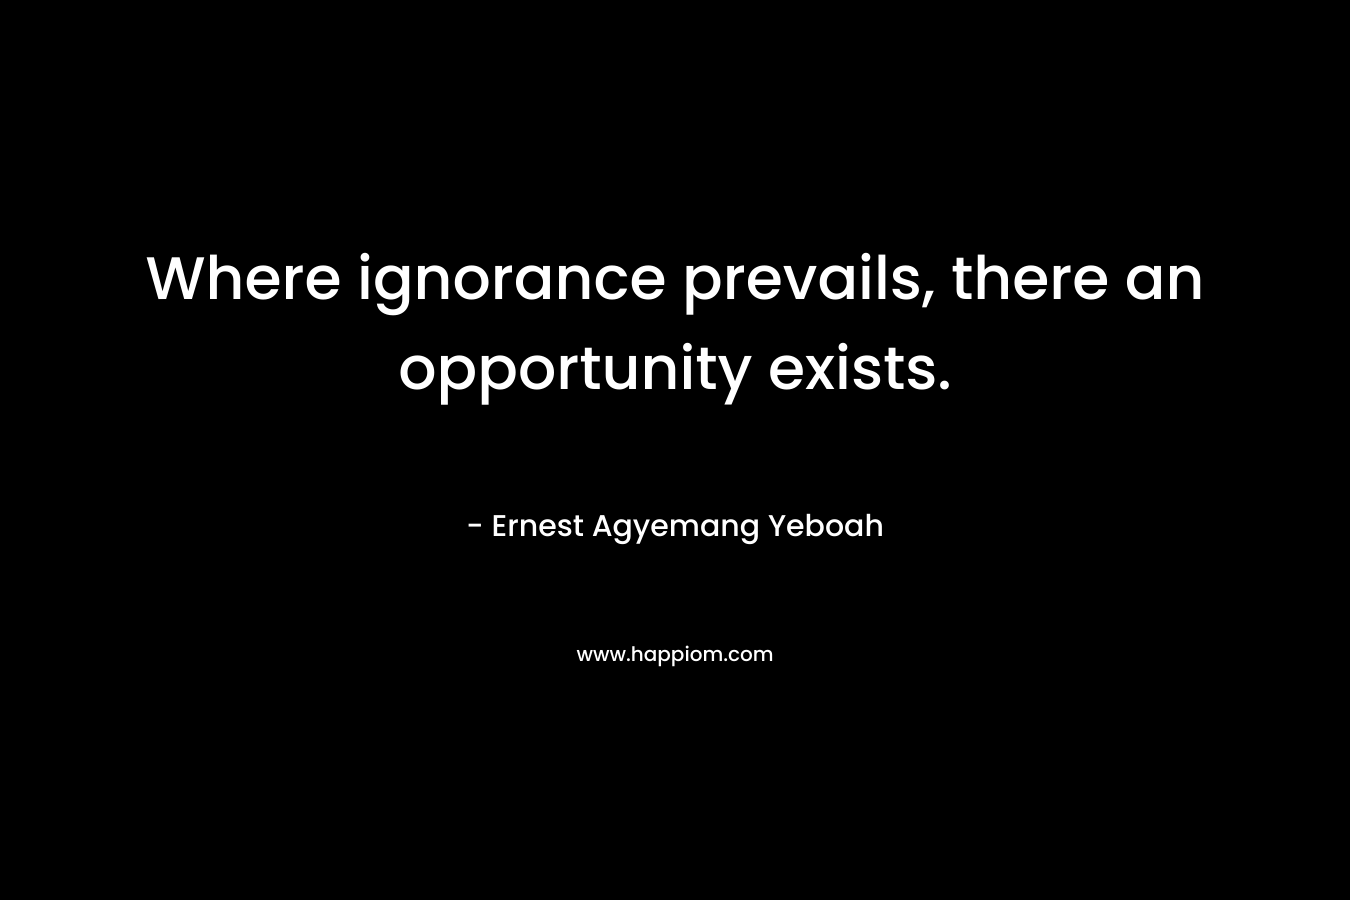 Where ignorance prevails, there an opportunity exists. – Ernest Agyemang Yeboah